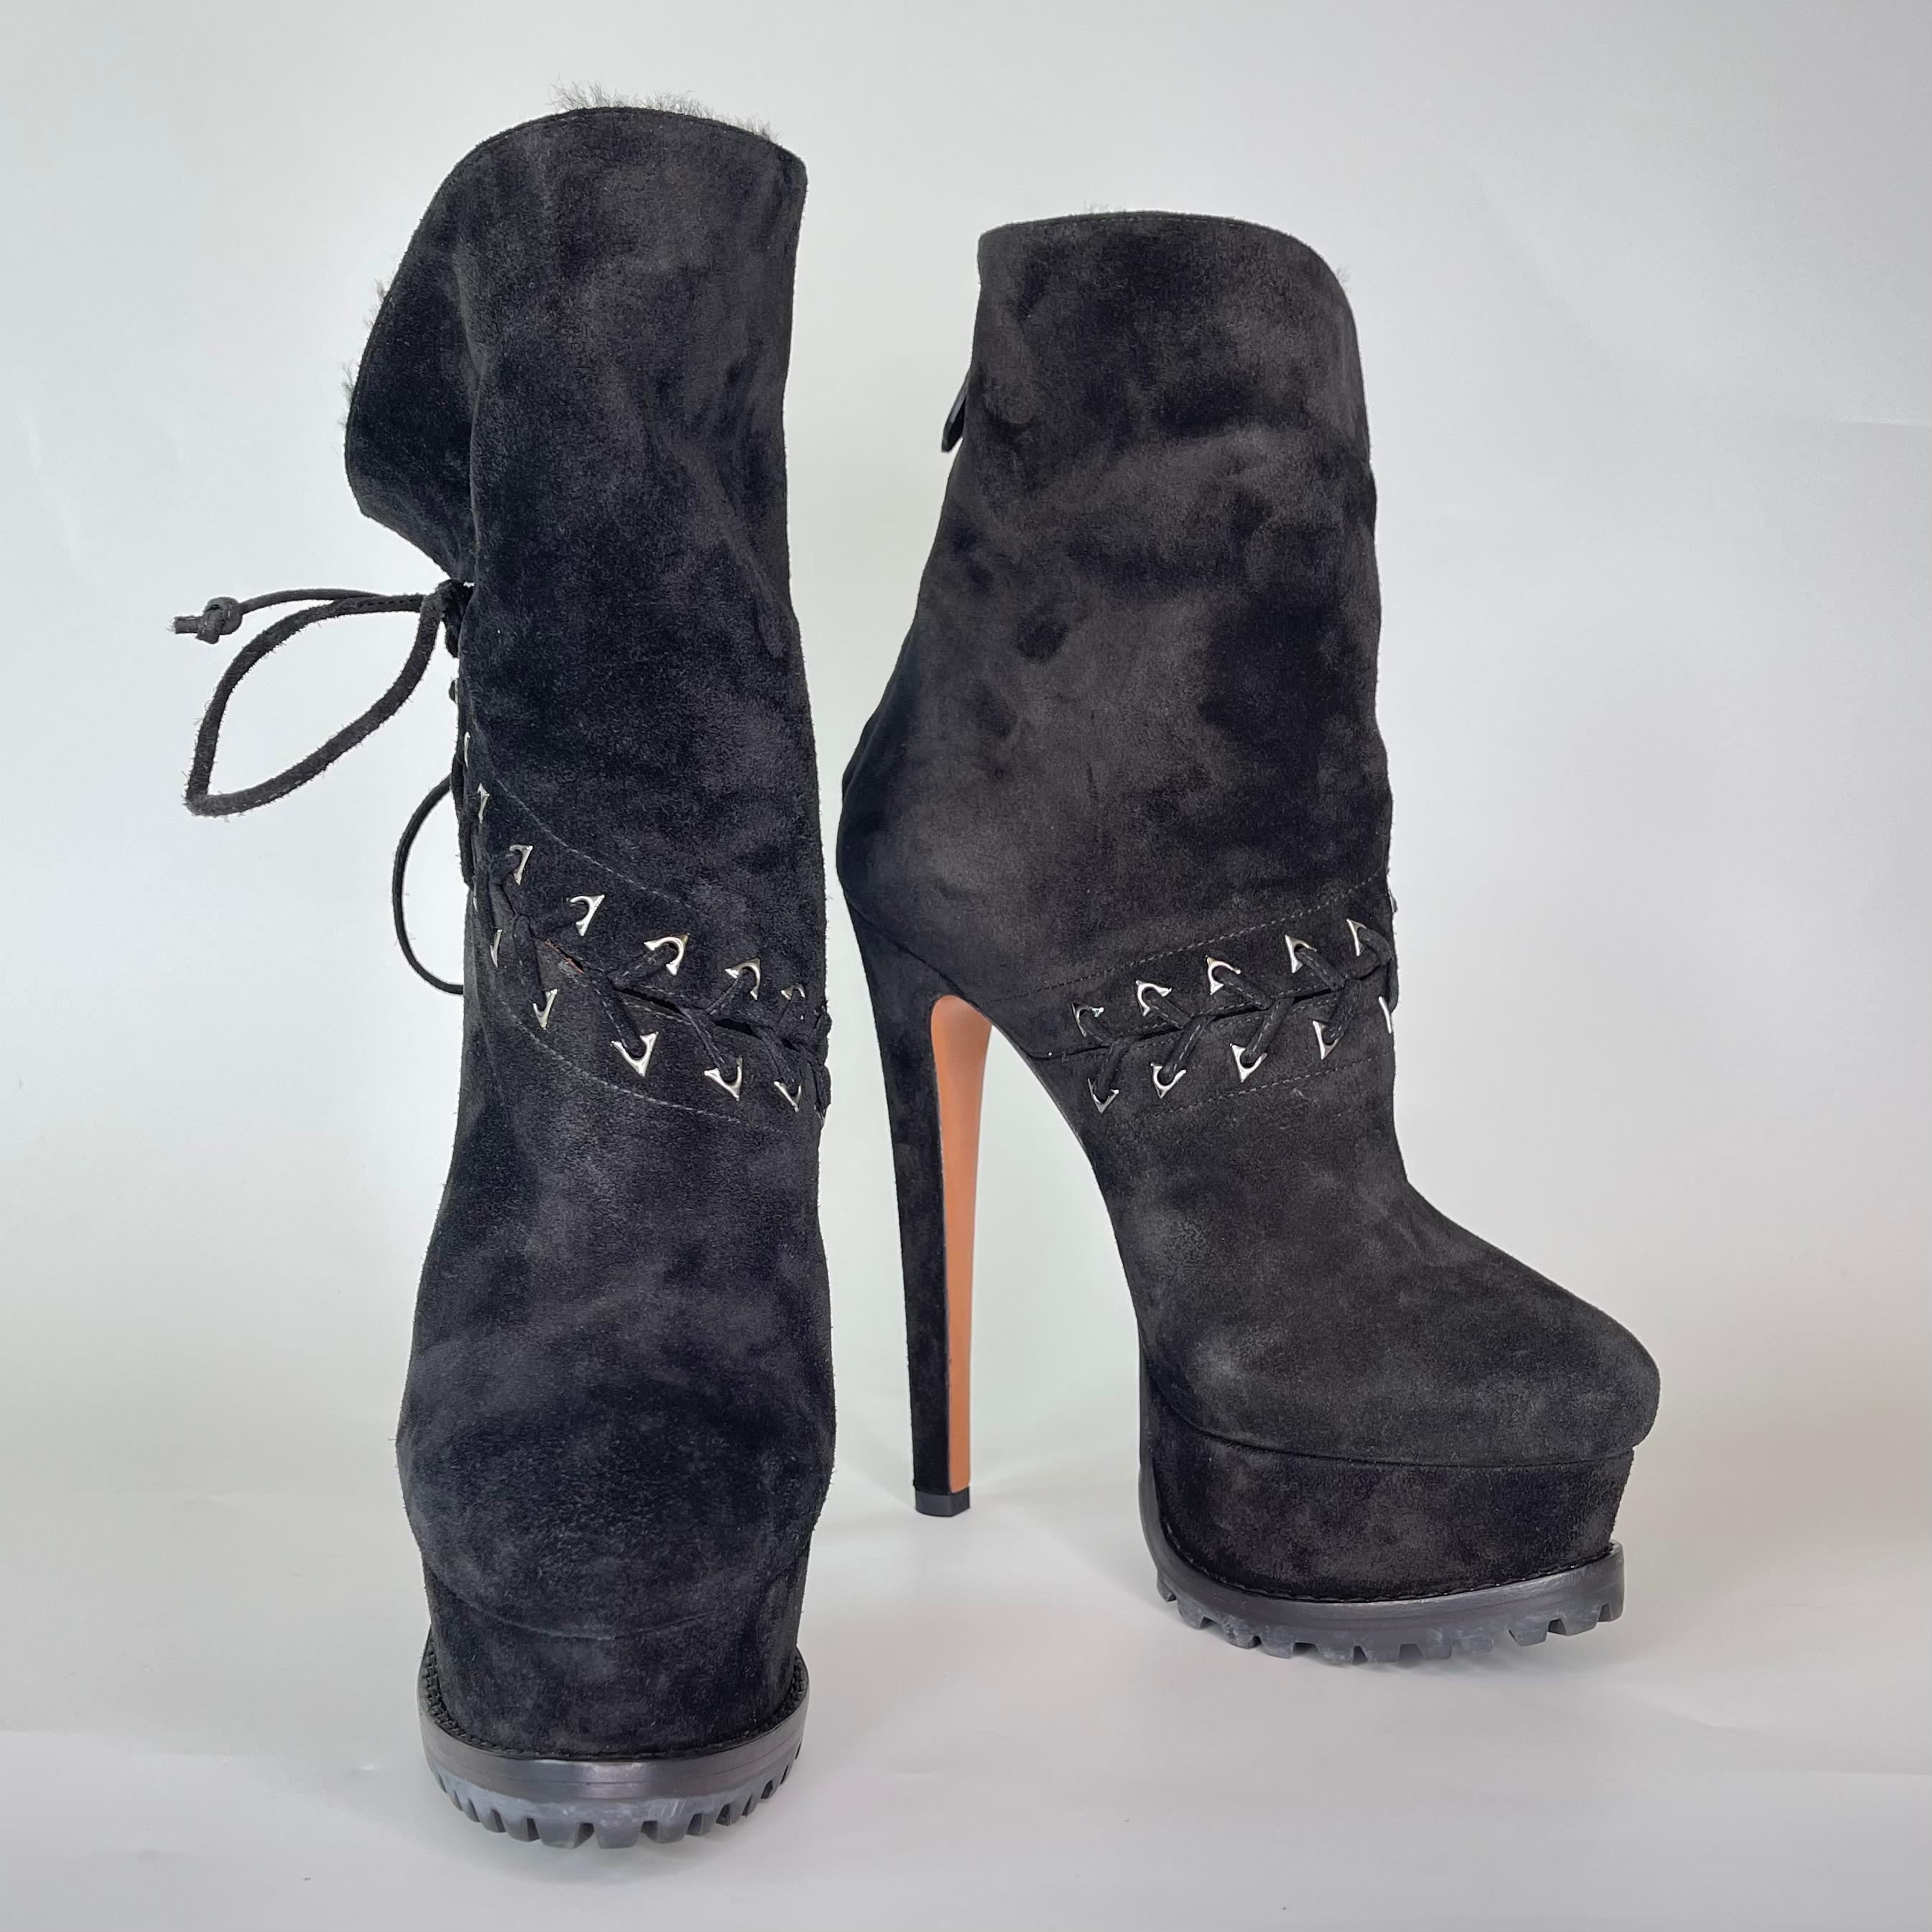 As seen on Ariana Grande! These glamorous hiking boots have an exterior of black suede and feature lace up fastening, triangular silver-toned eyelets, fur lining, round toe, stiletto heel, covered heel and rubber and leather soles.

COLOR: